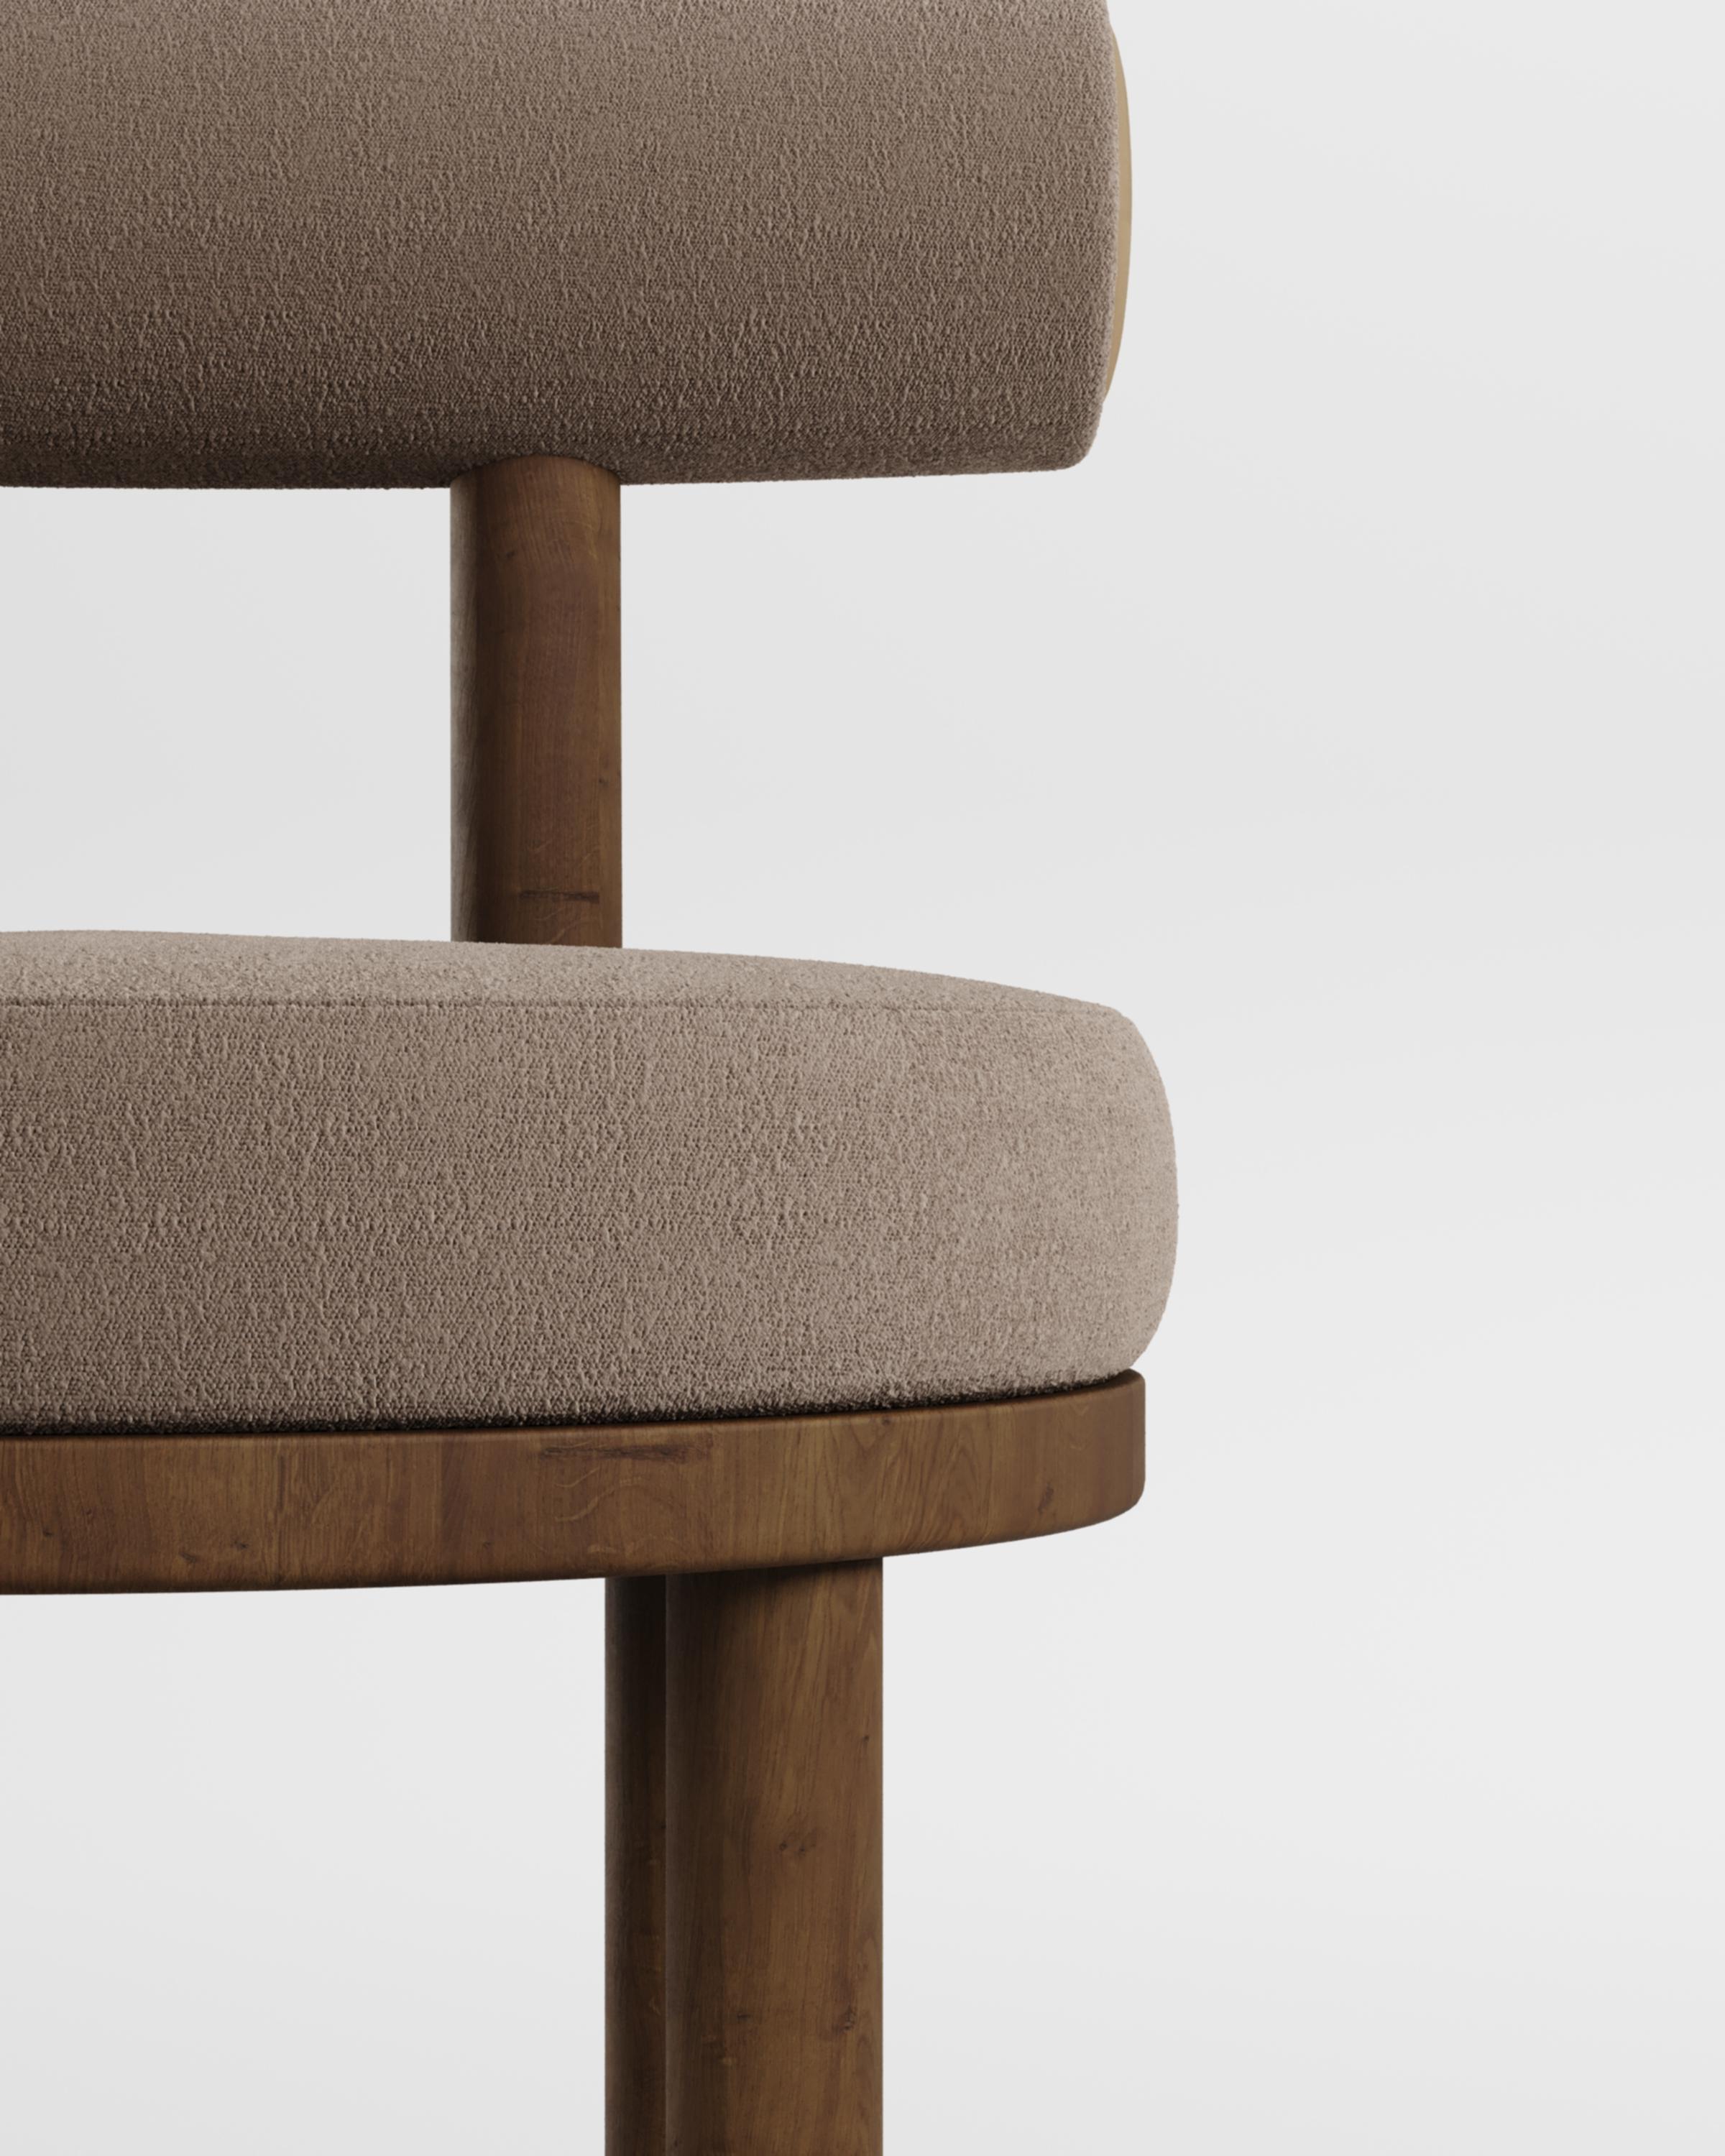 Contemporary Modern Moca Chair in Bouclé Brown & Smoked Oak Made in Portugal by Collector For Sale